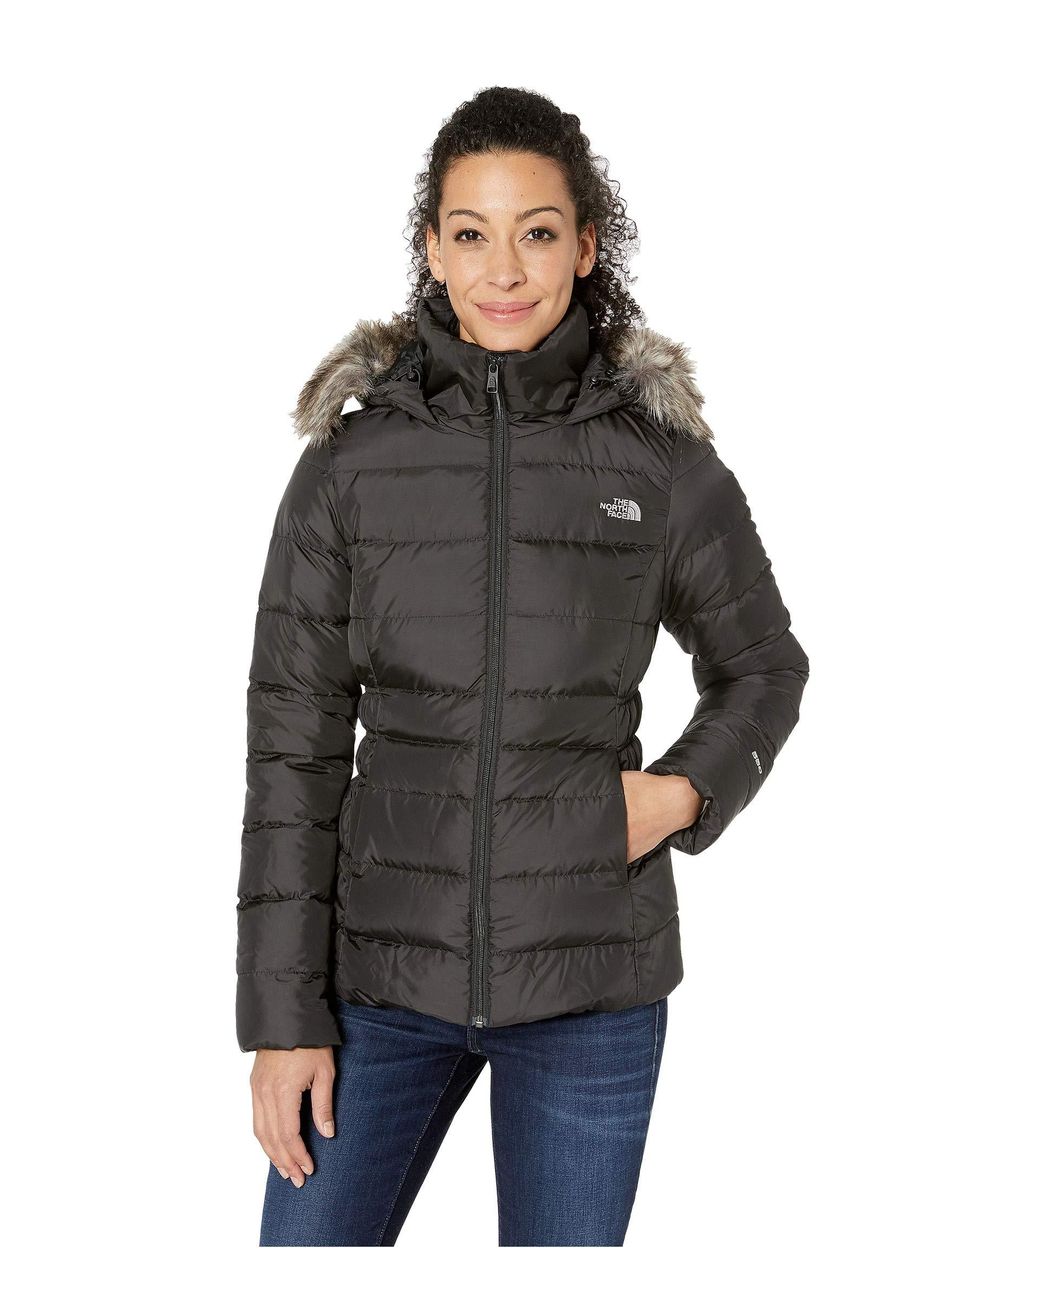 The North Face Gotham Jacket Ii in Black - Lyst